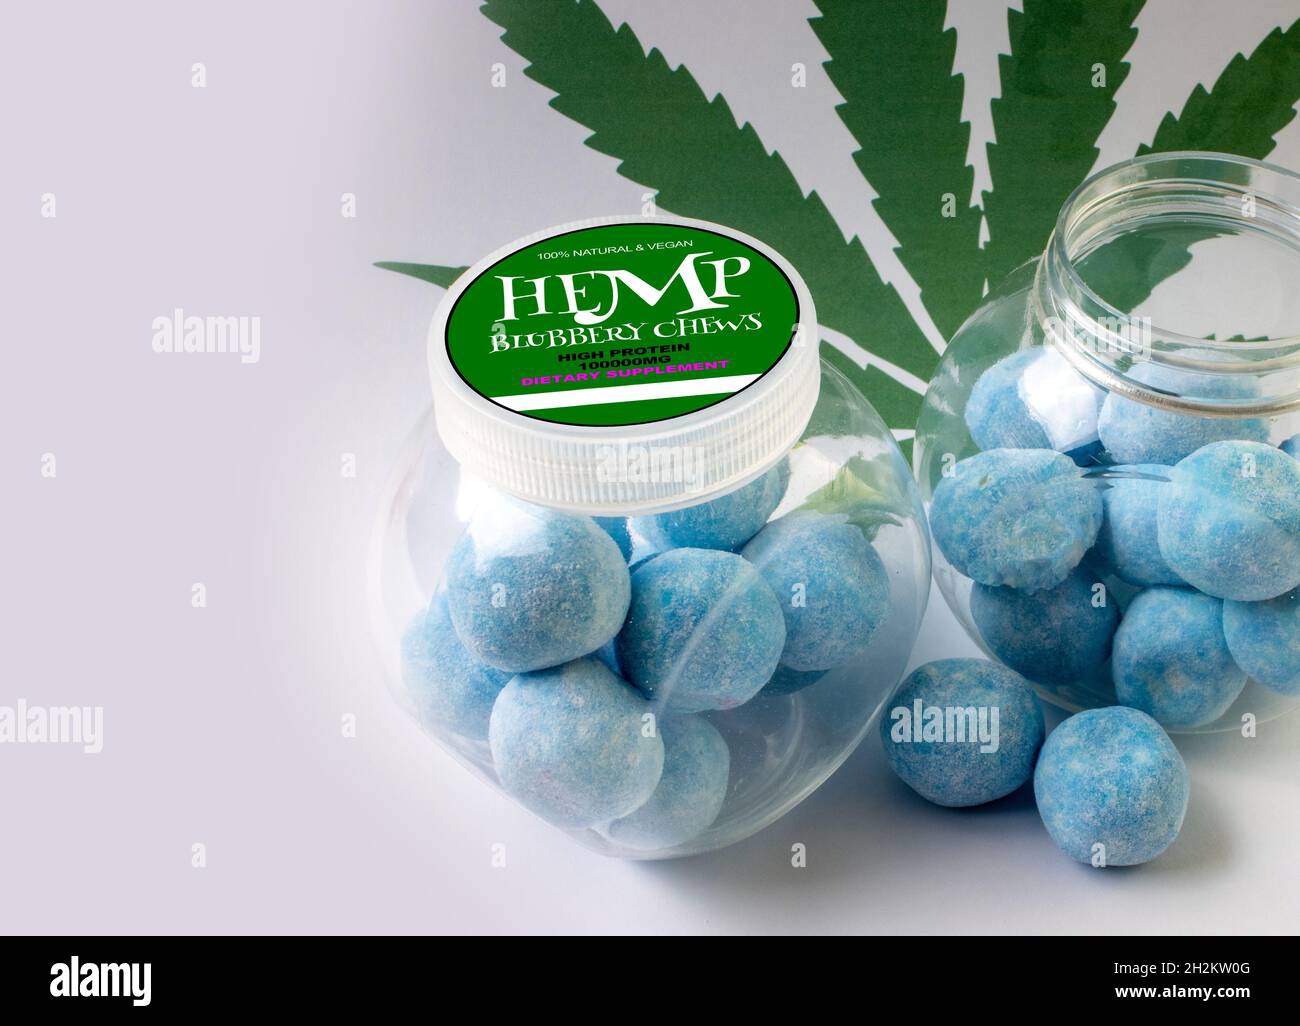 Cannabis infused blueberry chews, conceptual image Stock Photo